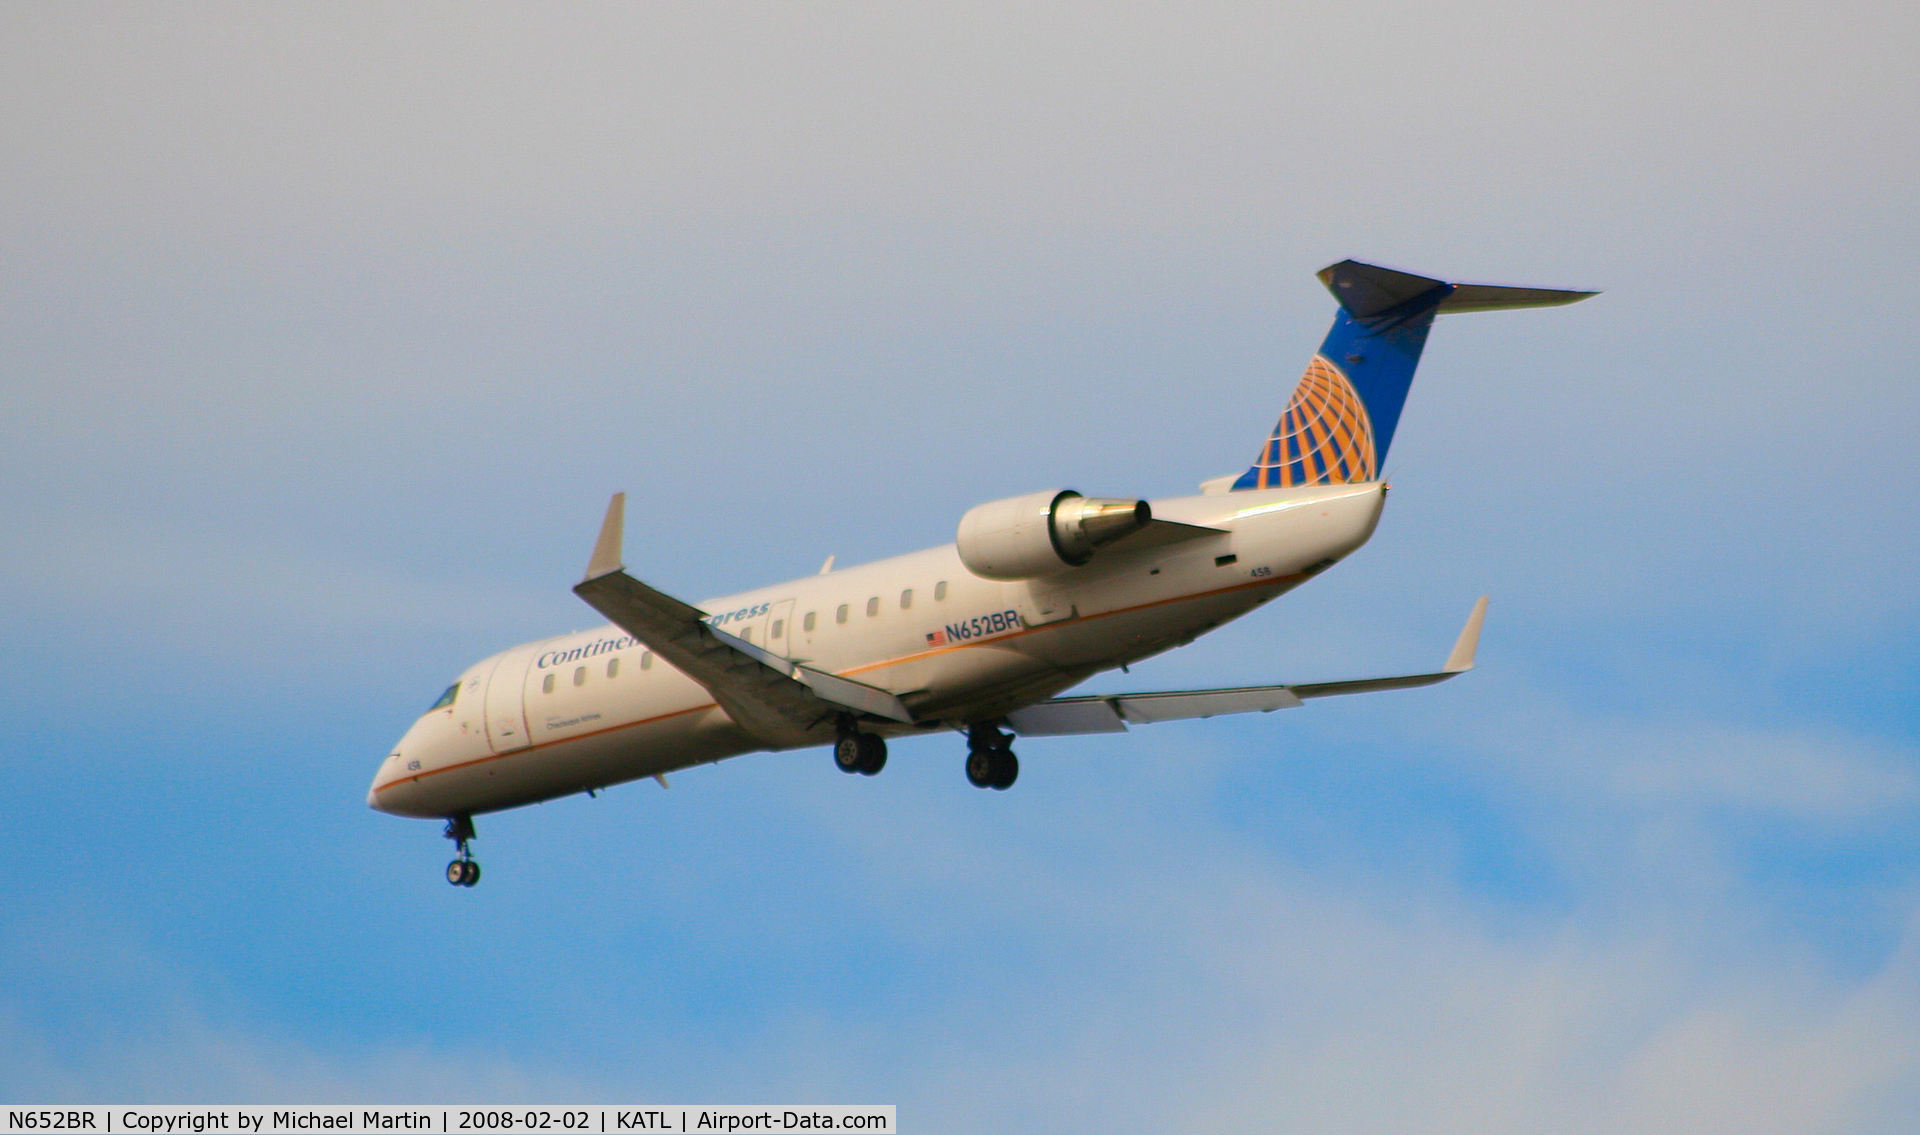 N652BR, 2000 Bombardier CRJ-200ER (CL-600-2B19) C/N 7429, Over the numbers of 26R